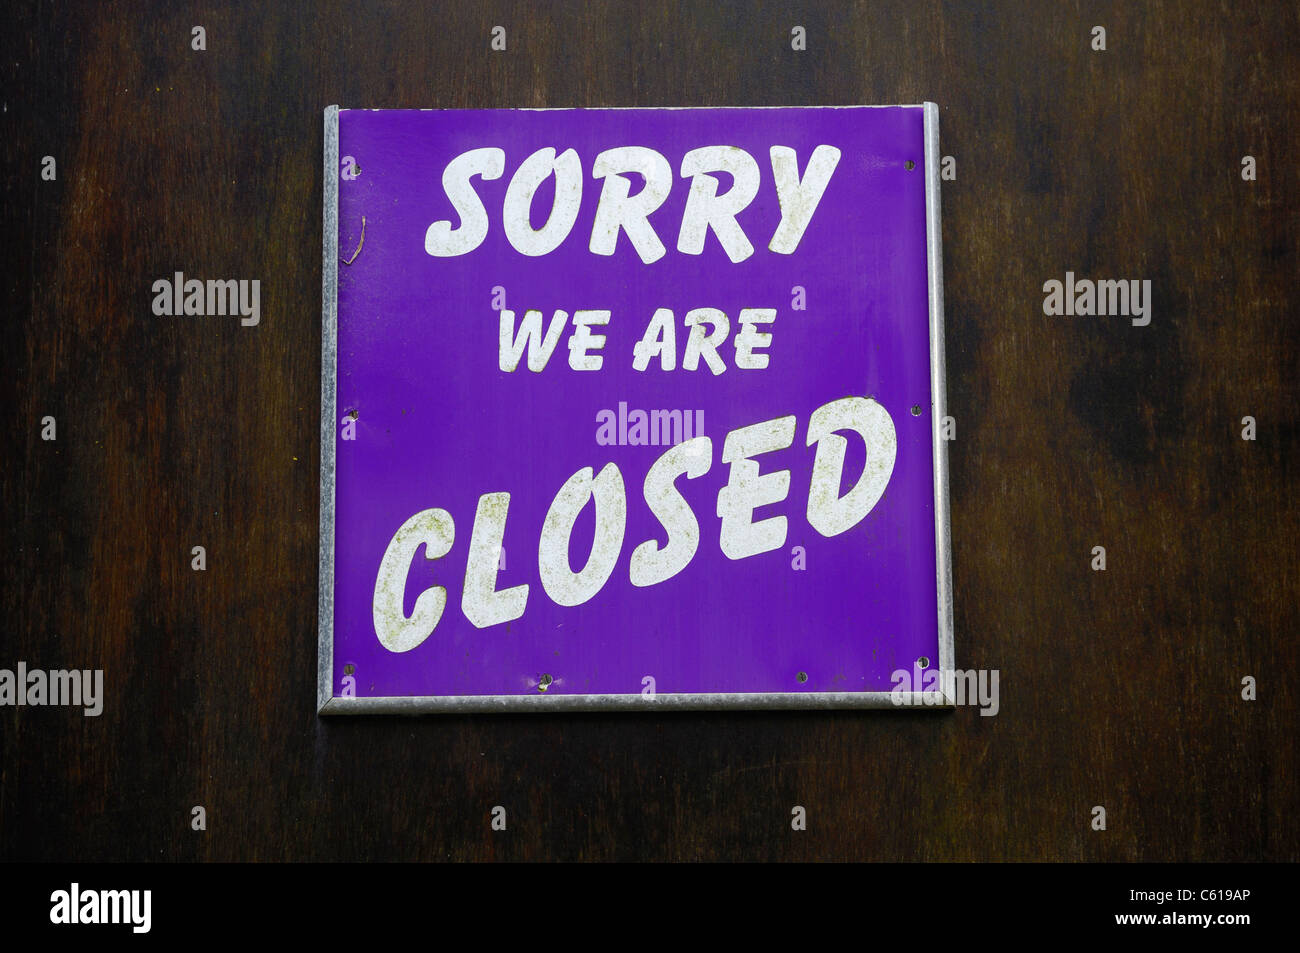 Sorry we are closed sign pinned to a wooden door. Stock Photo